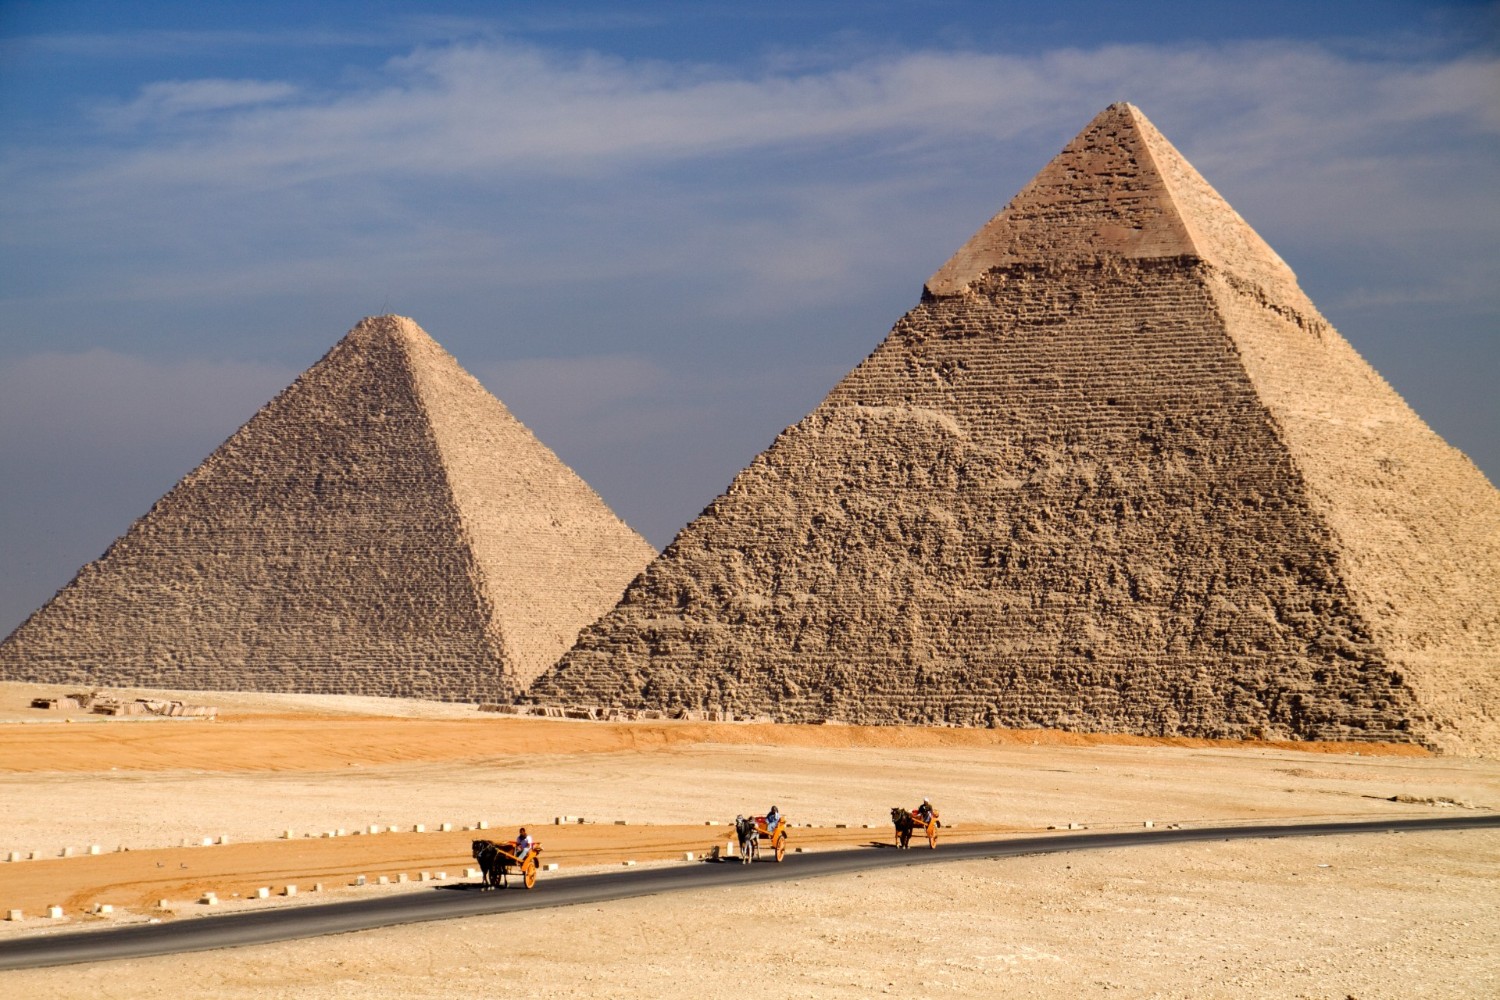 Pyramids of Keops and Kefren in Giza (Cairo) Egypt